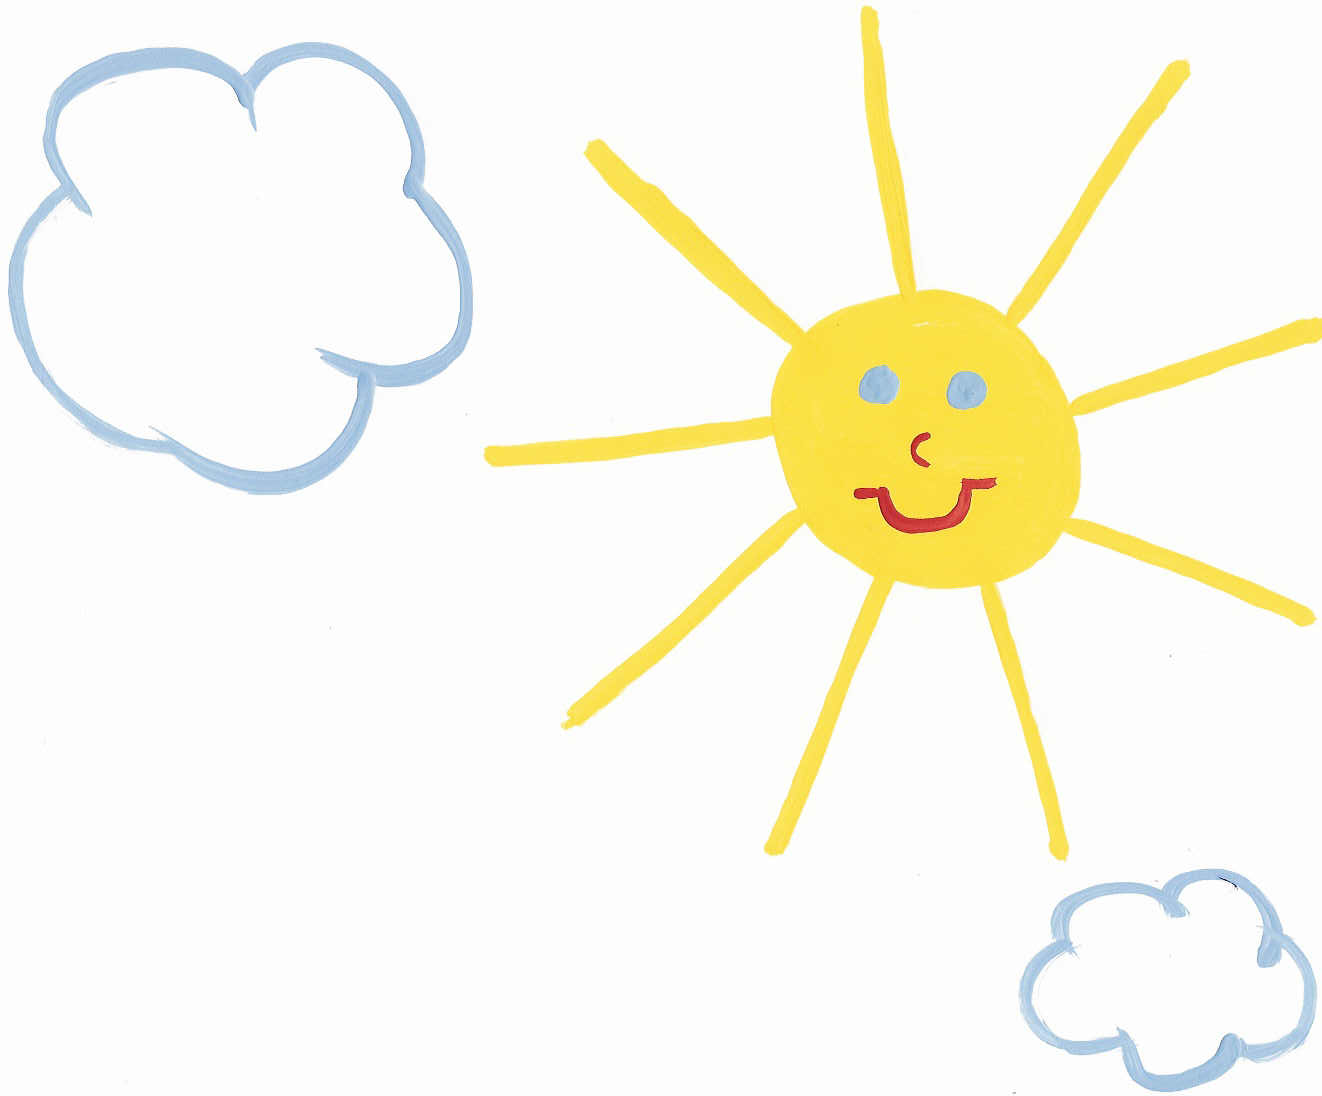 Sunny Day Pictures Free - ClipArt Best